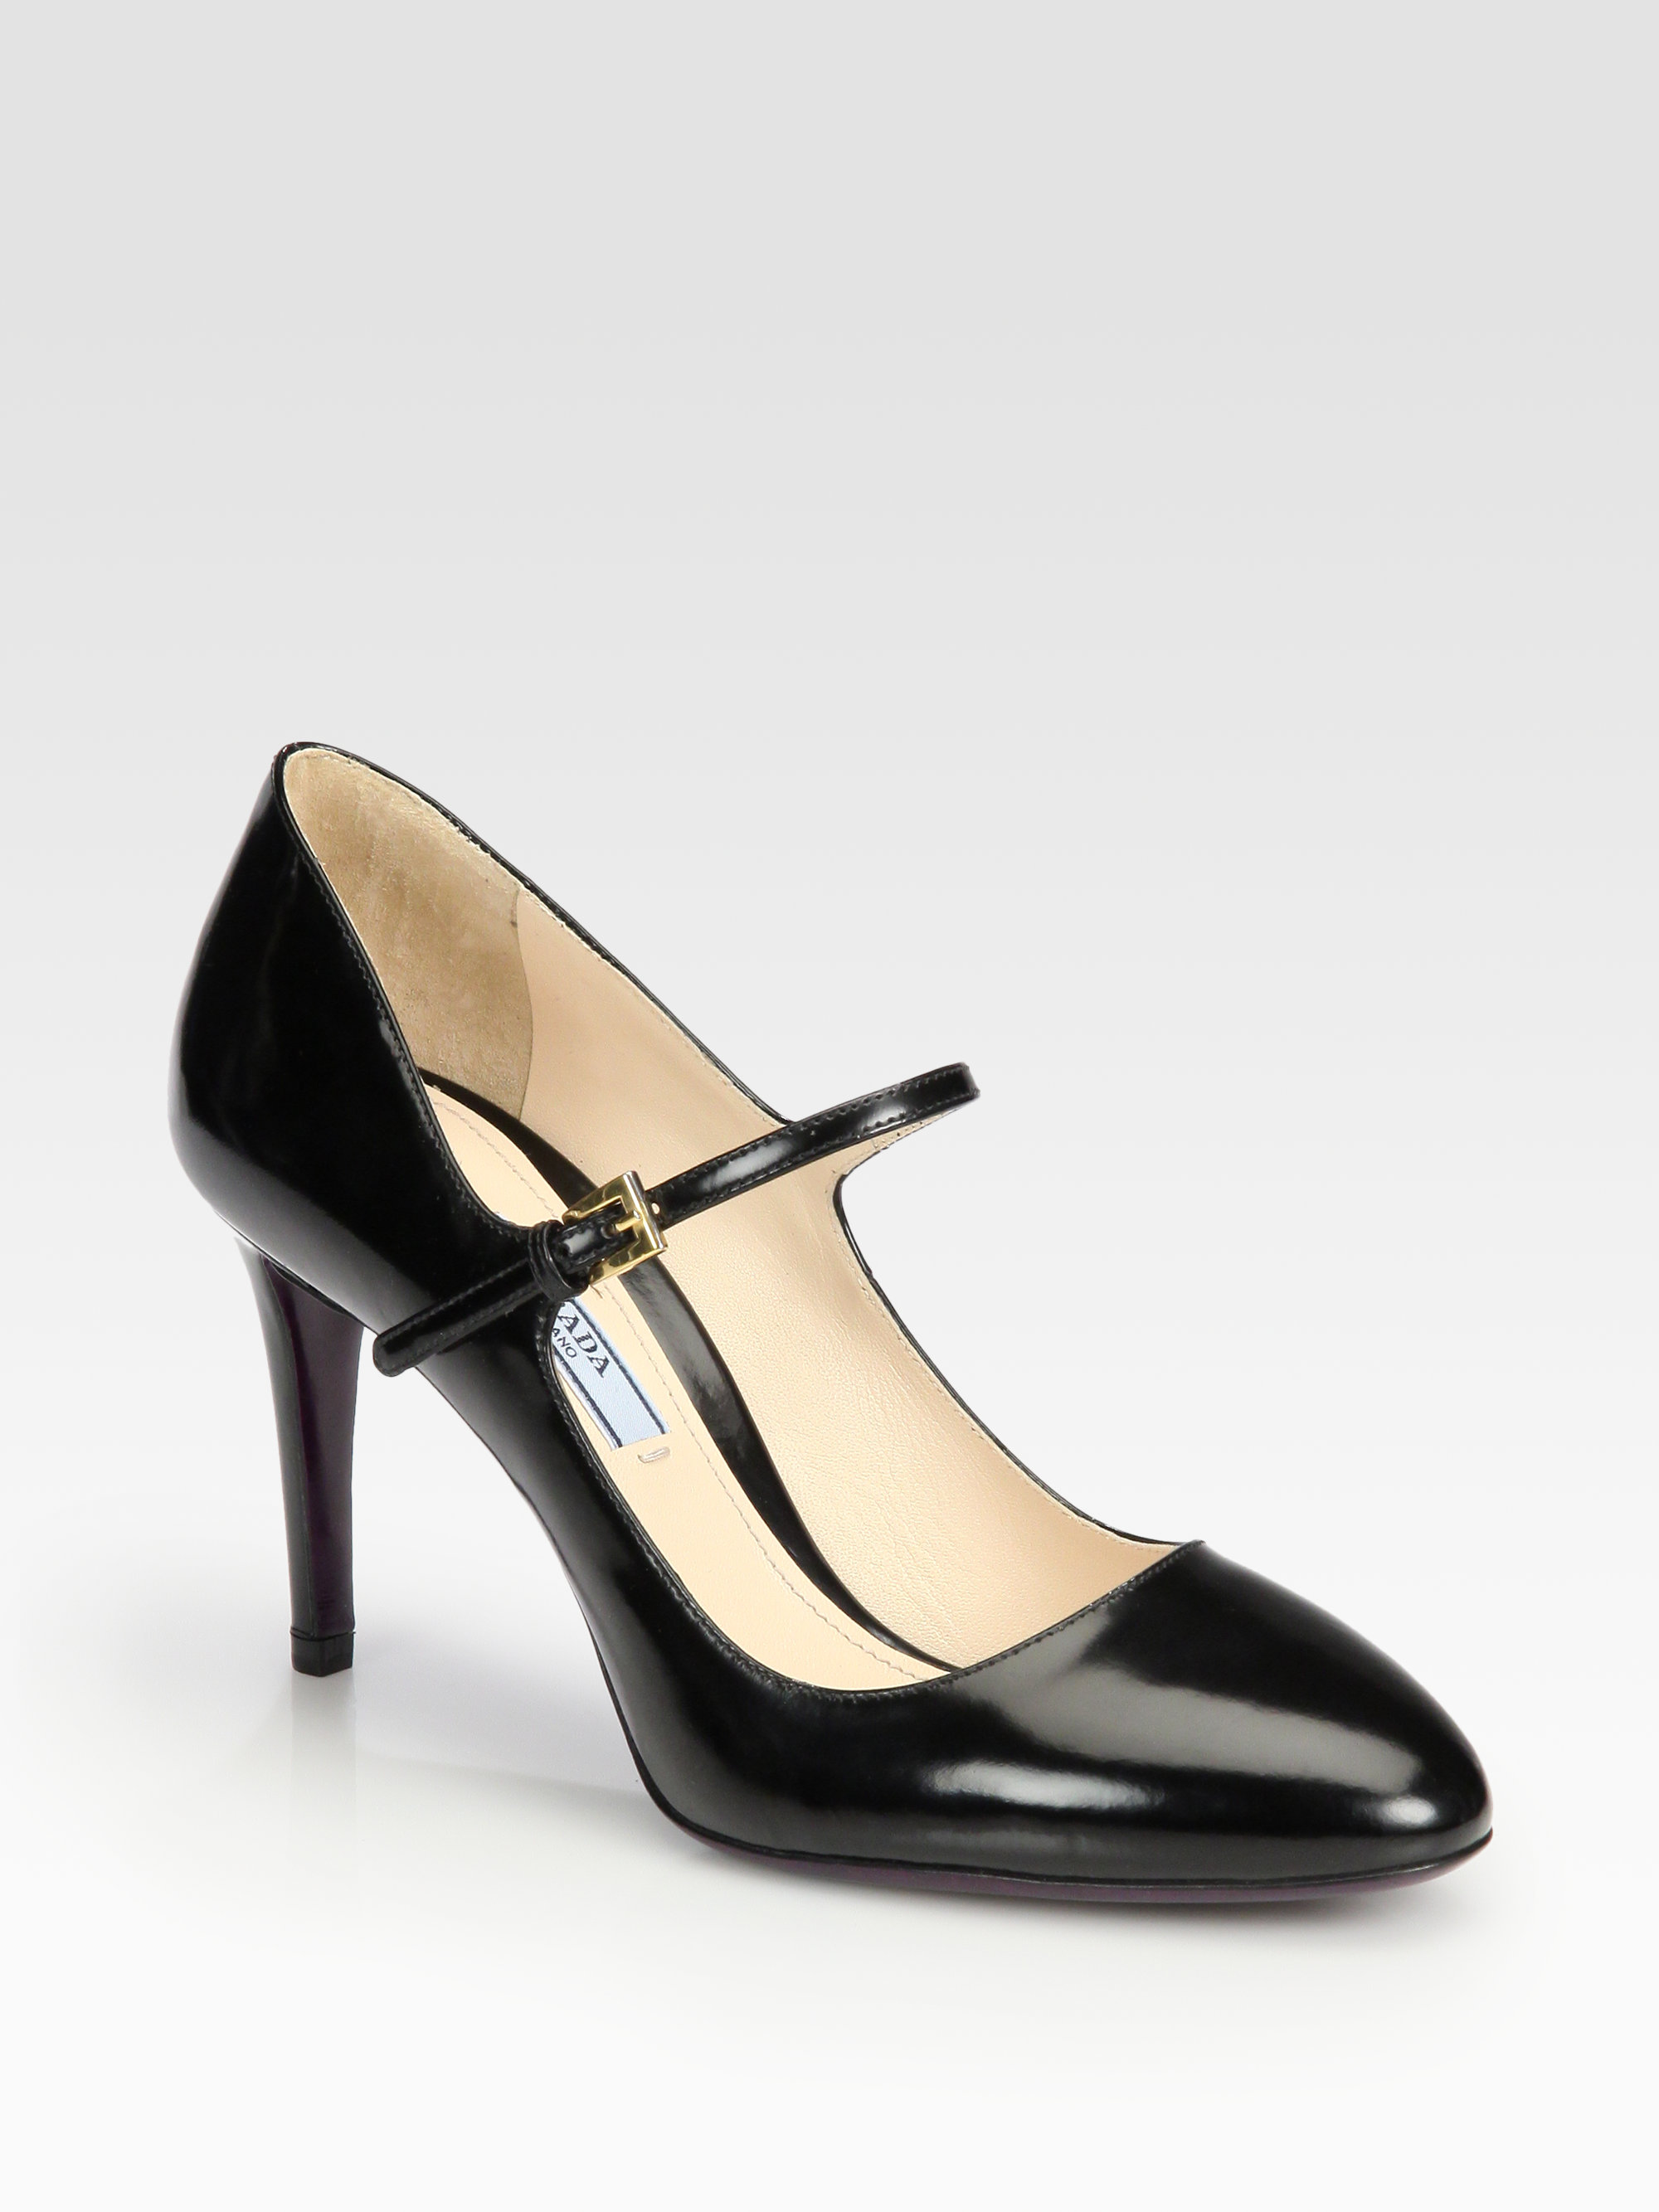 Lyst - Prada Patent Leather Mary Jane Pumps in Brown